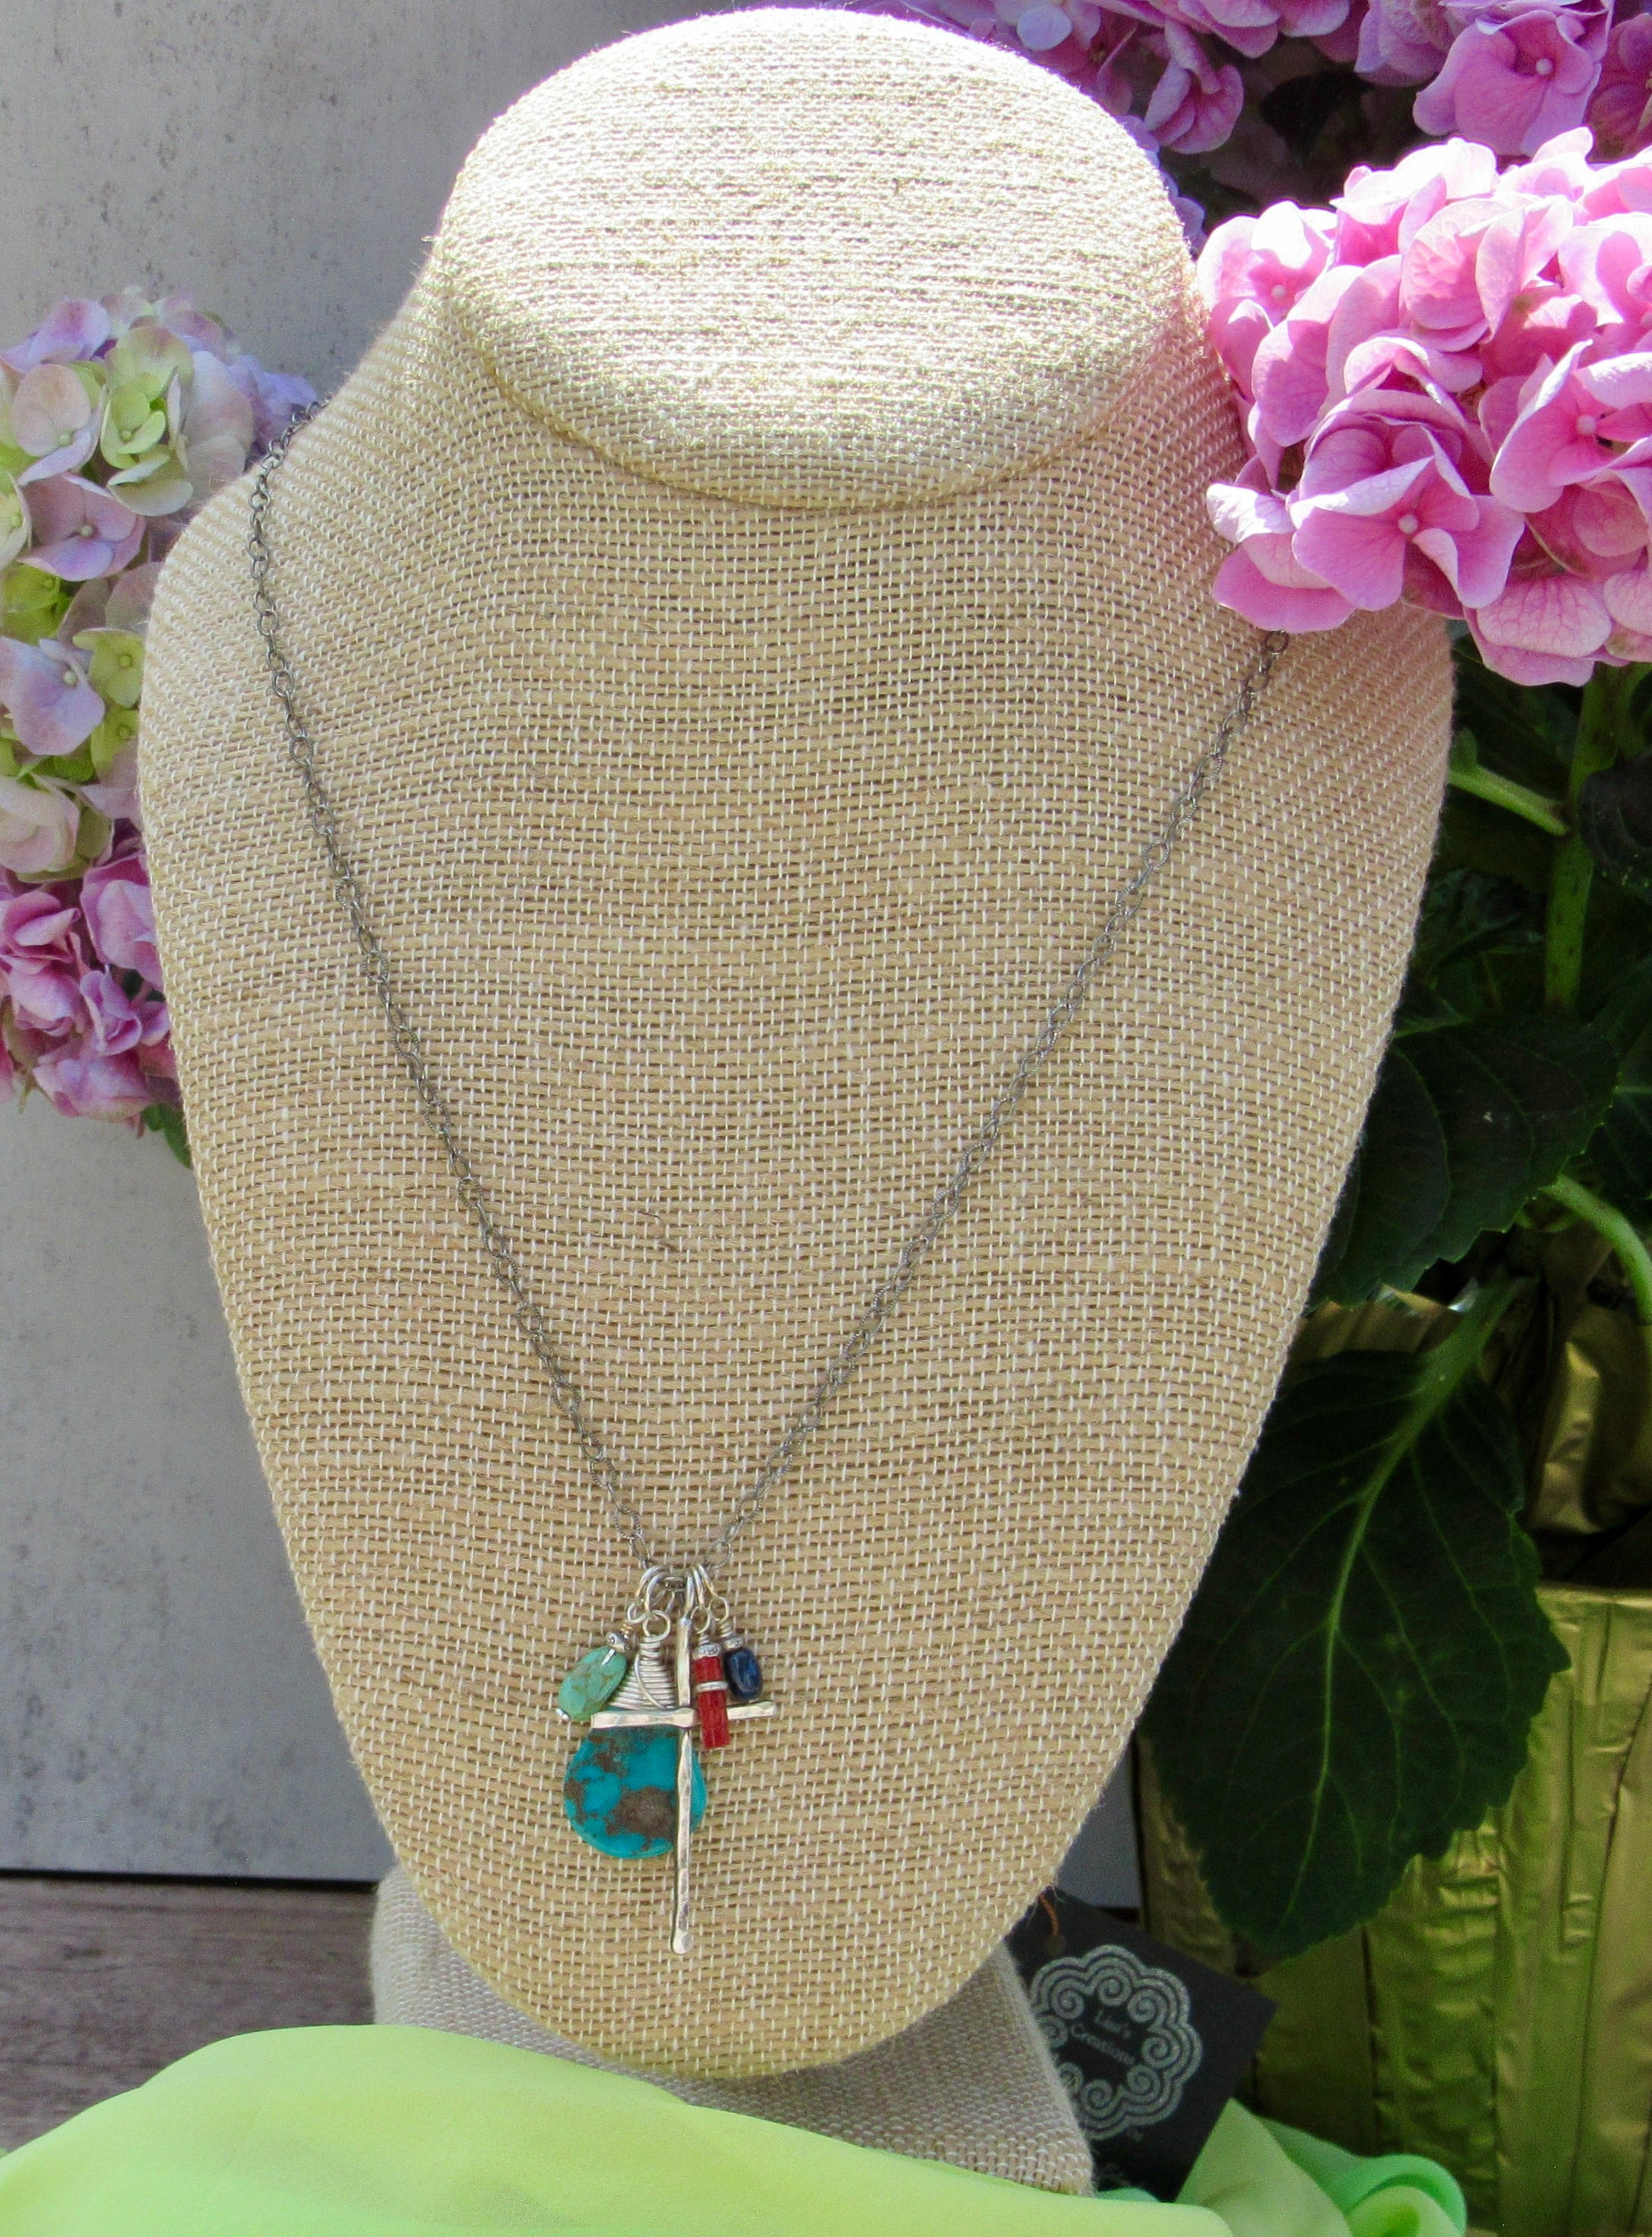 Turquoise Cross Charm Necklace